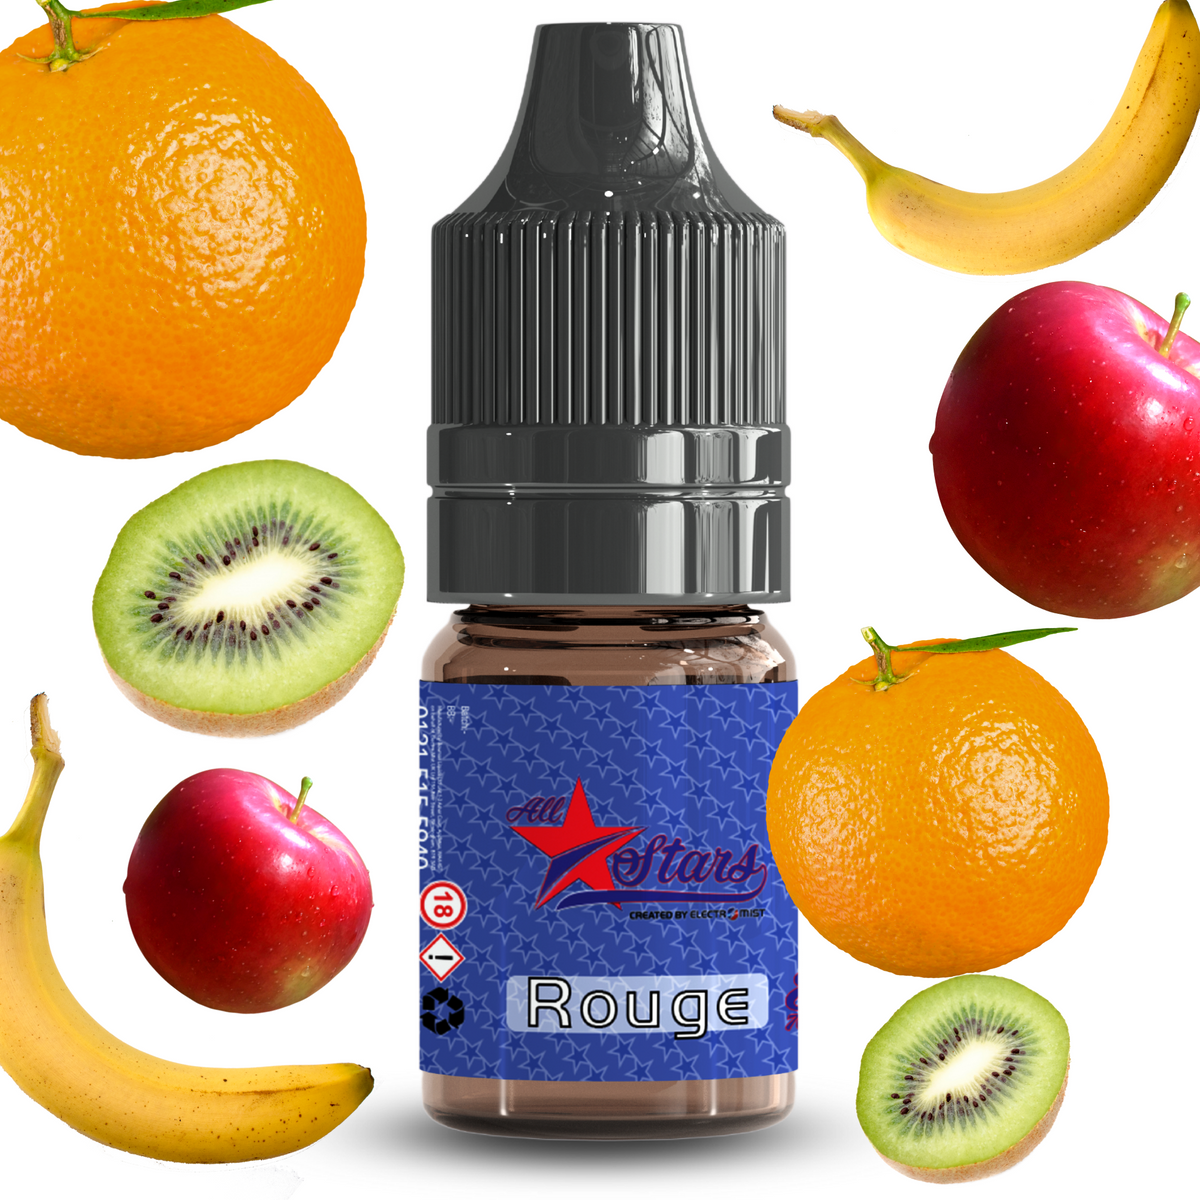 All Stars E-Liquid from the vape brand you can trust, Electromist, . Get your taste buds ready for a flavour sensation, Rouge. Nicotine Content: 6mg/12mg/18mg Products may contain nicotine. For over 18s Only ejuice, vape pen, eliquid, e cigarette, 10ml, vaping, cloud, PG, VG, 60/40, vape liquid, Flavour, TPD